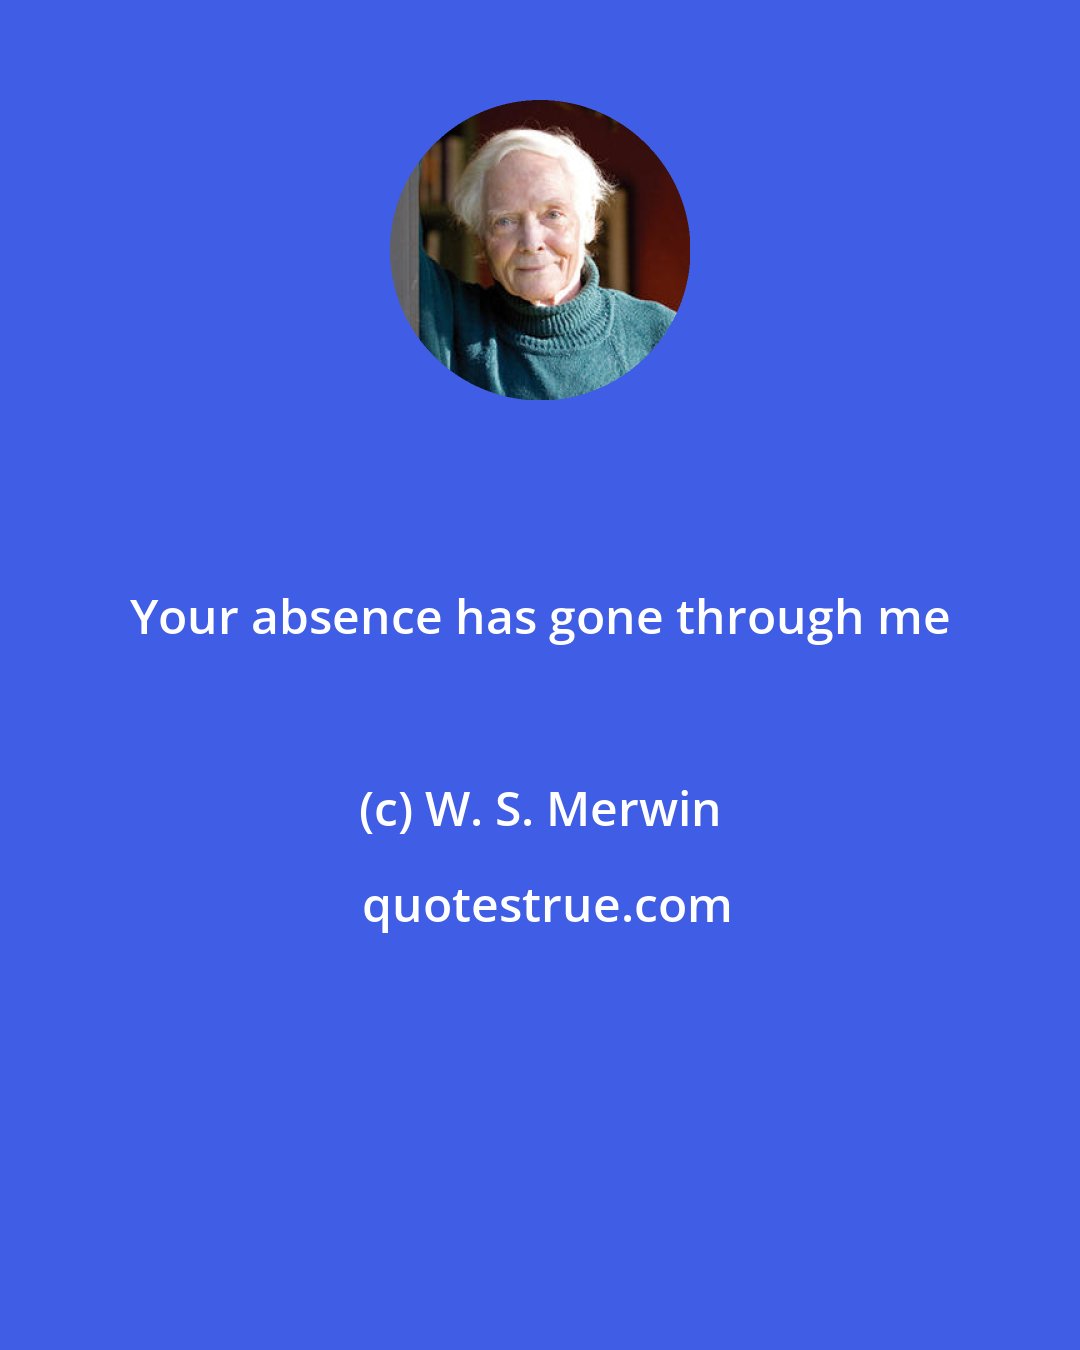 W. S. Merwin: Your absence has gone through me